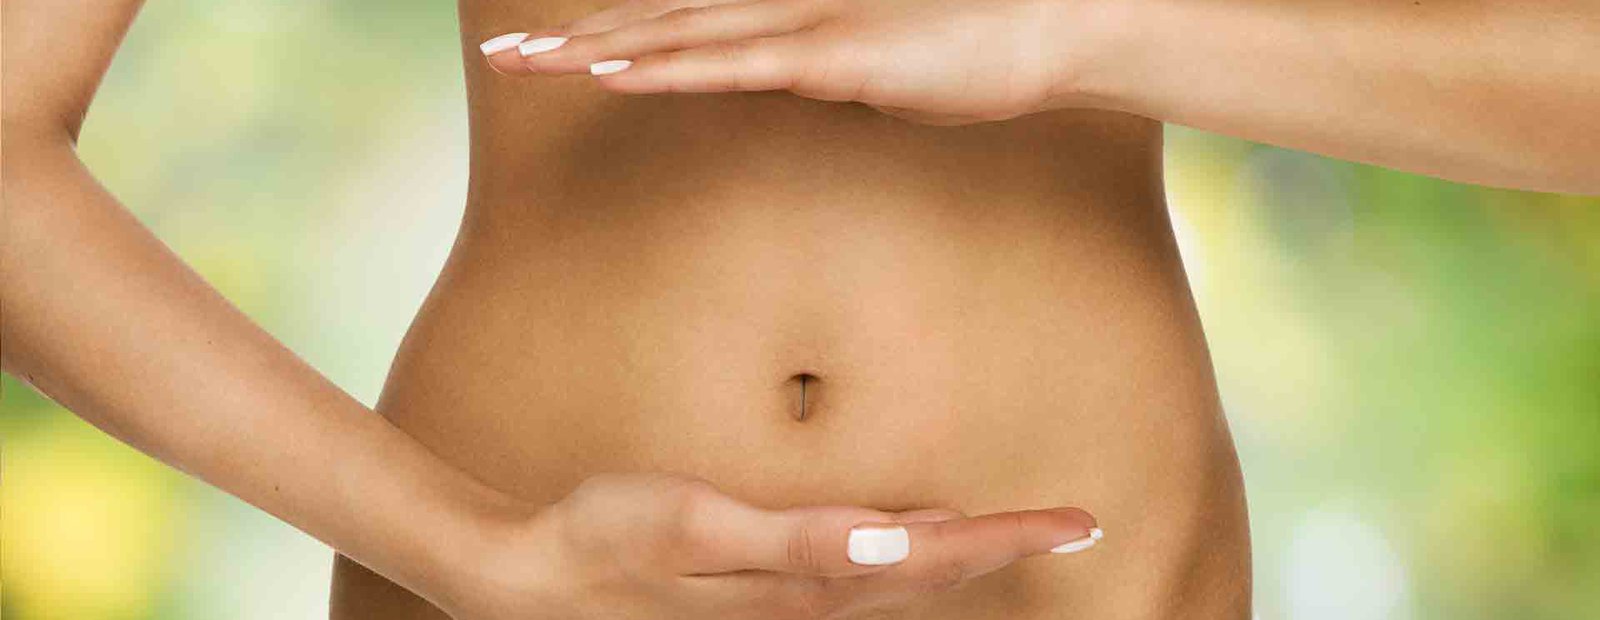 A bloated feeling: causes and remedies